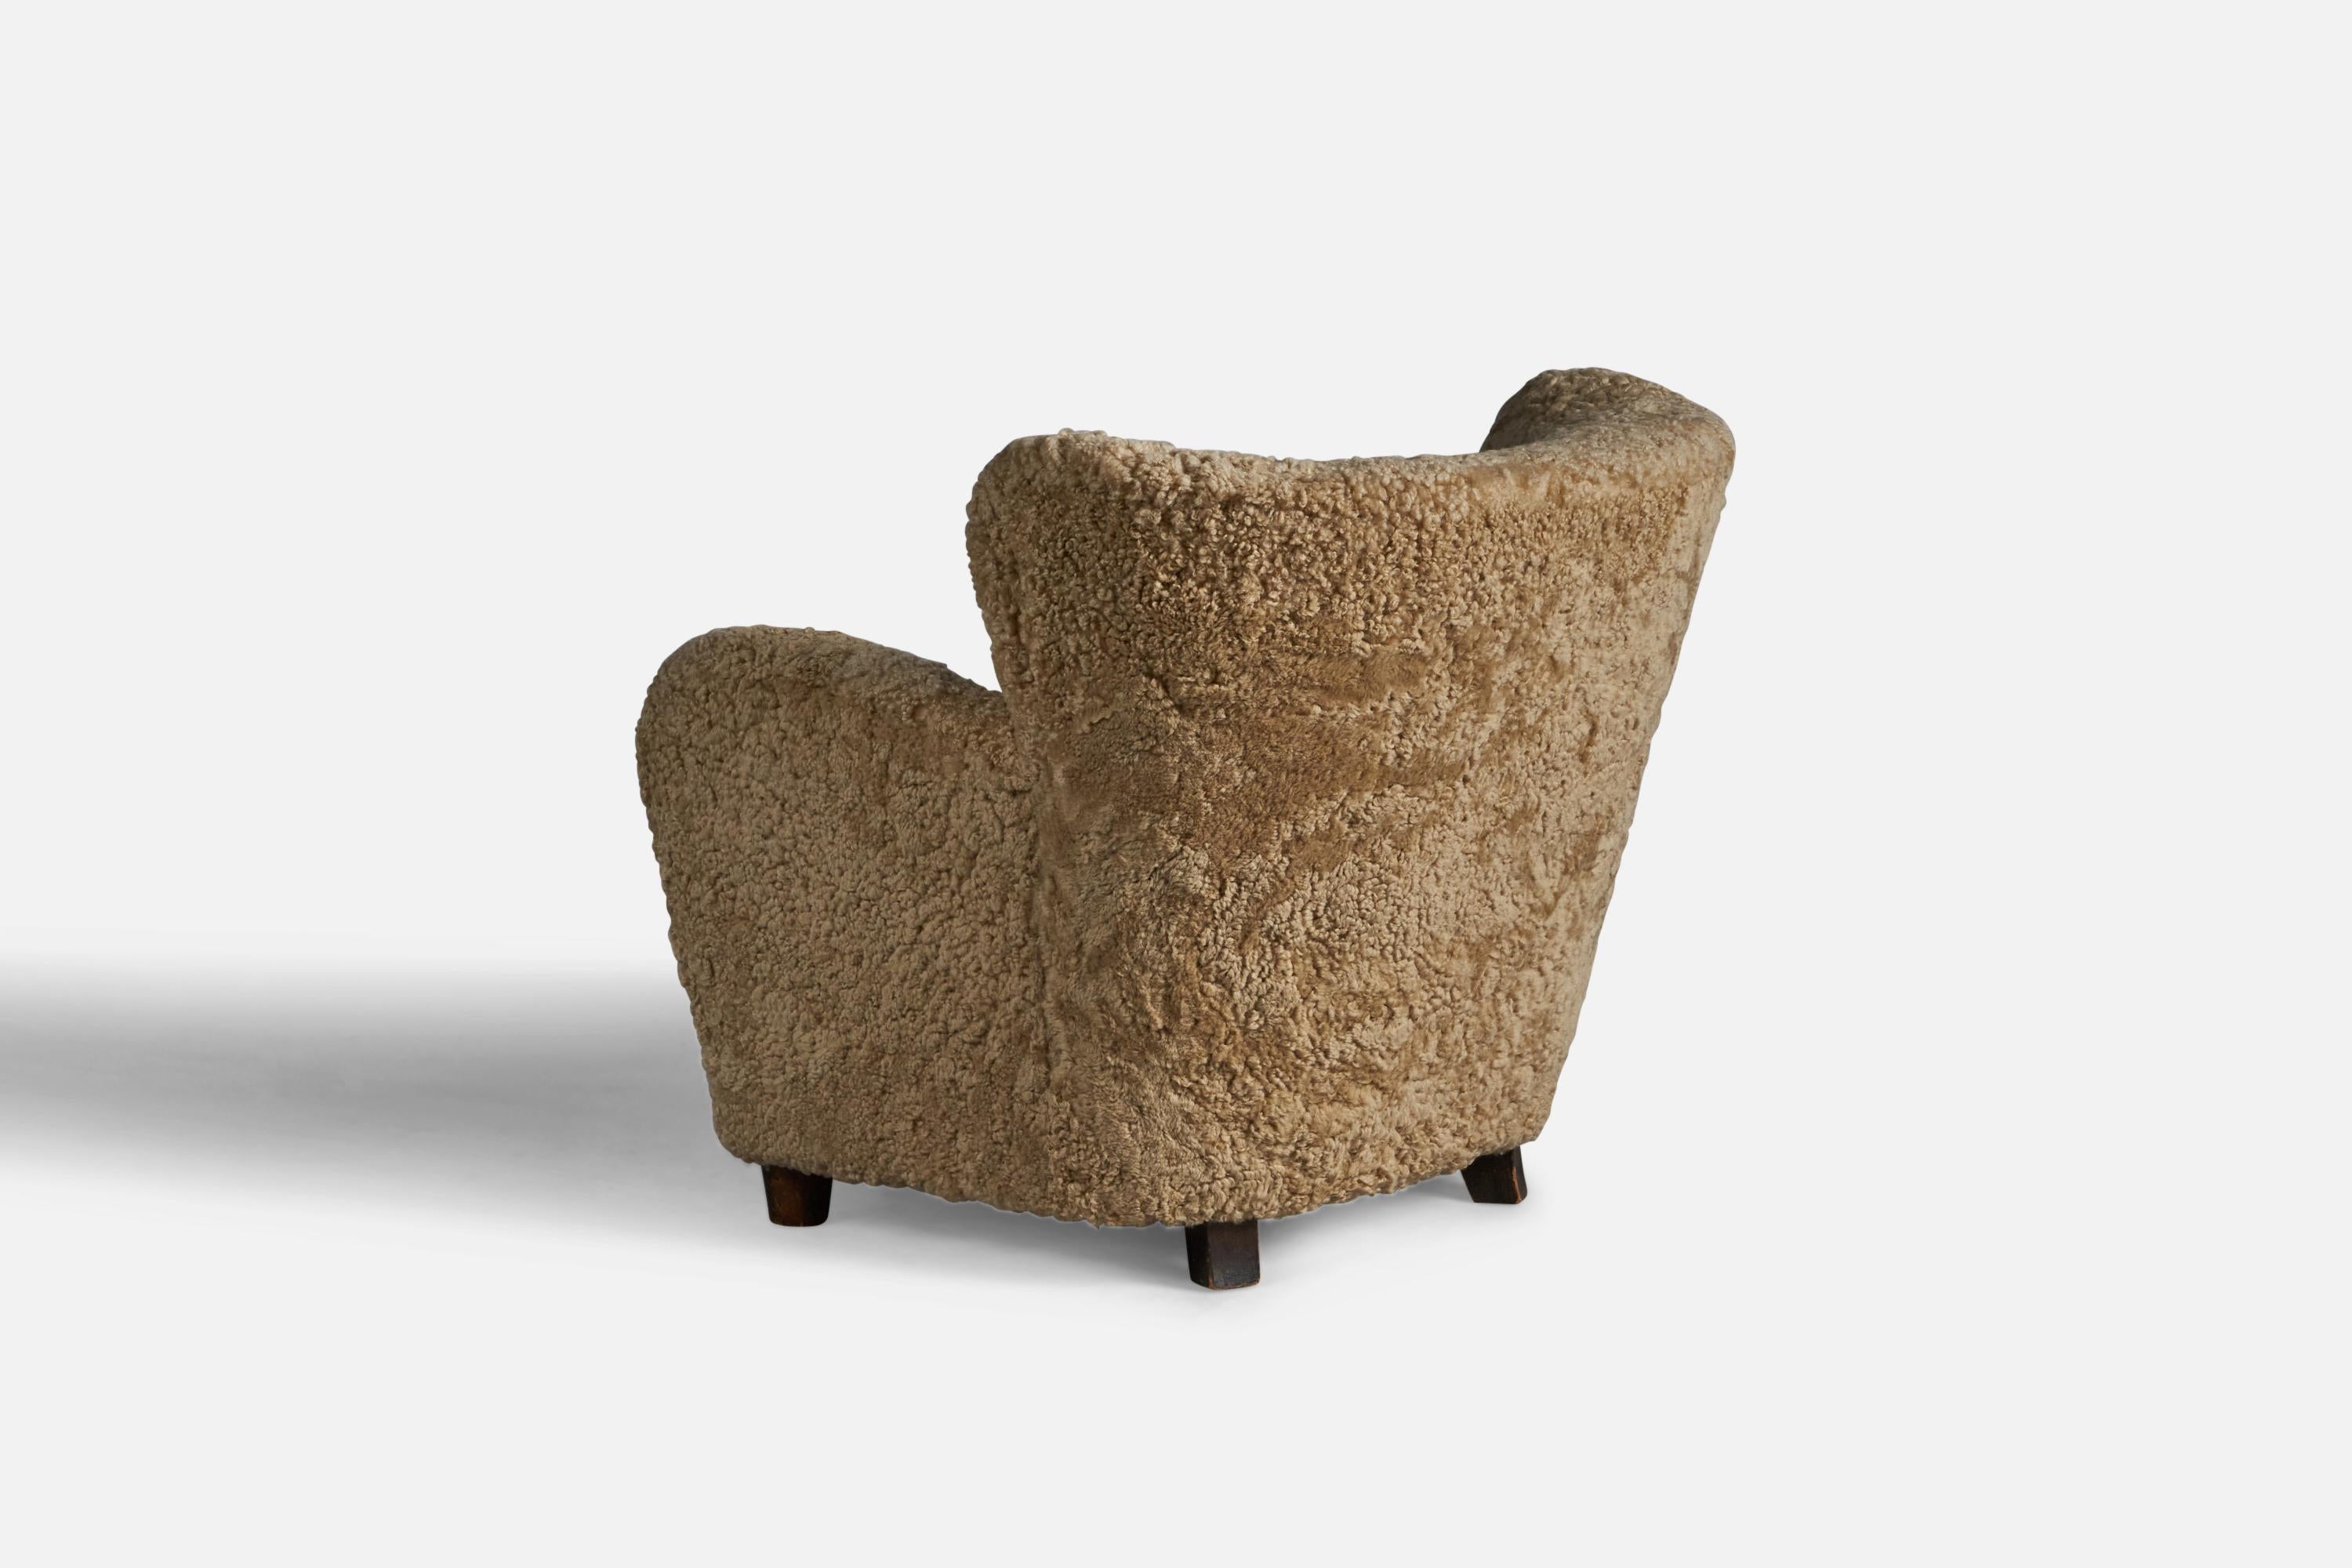 Mid-20th Century Finnish Designer, Organic Lounge Chairs, Shearling, Wood, Finland, 1940s For Sale